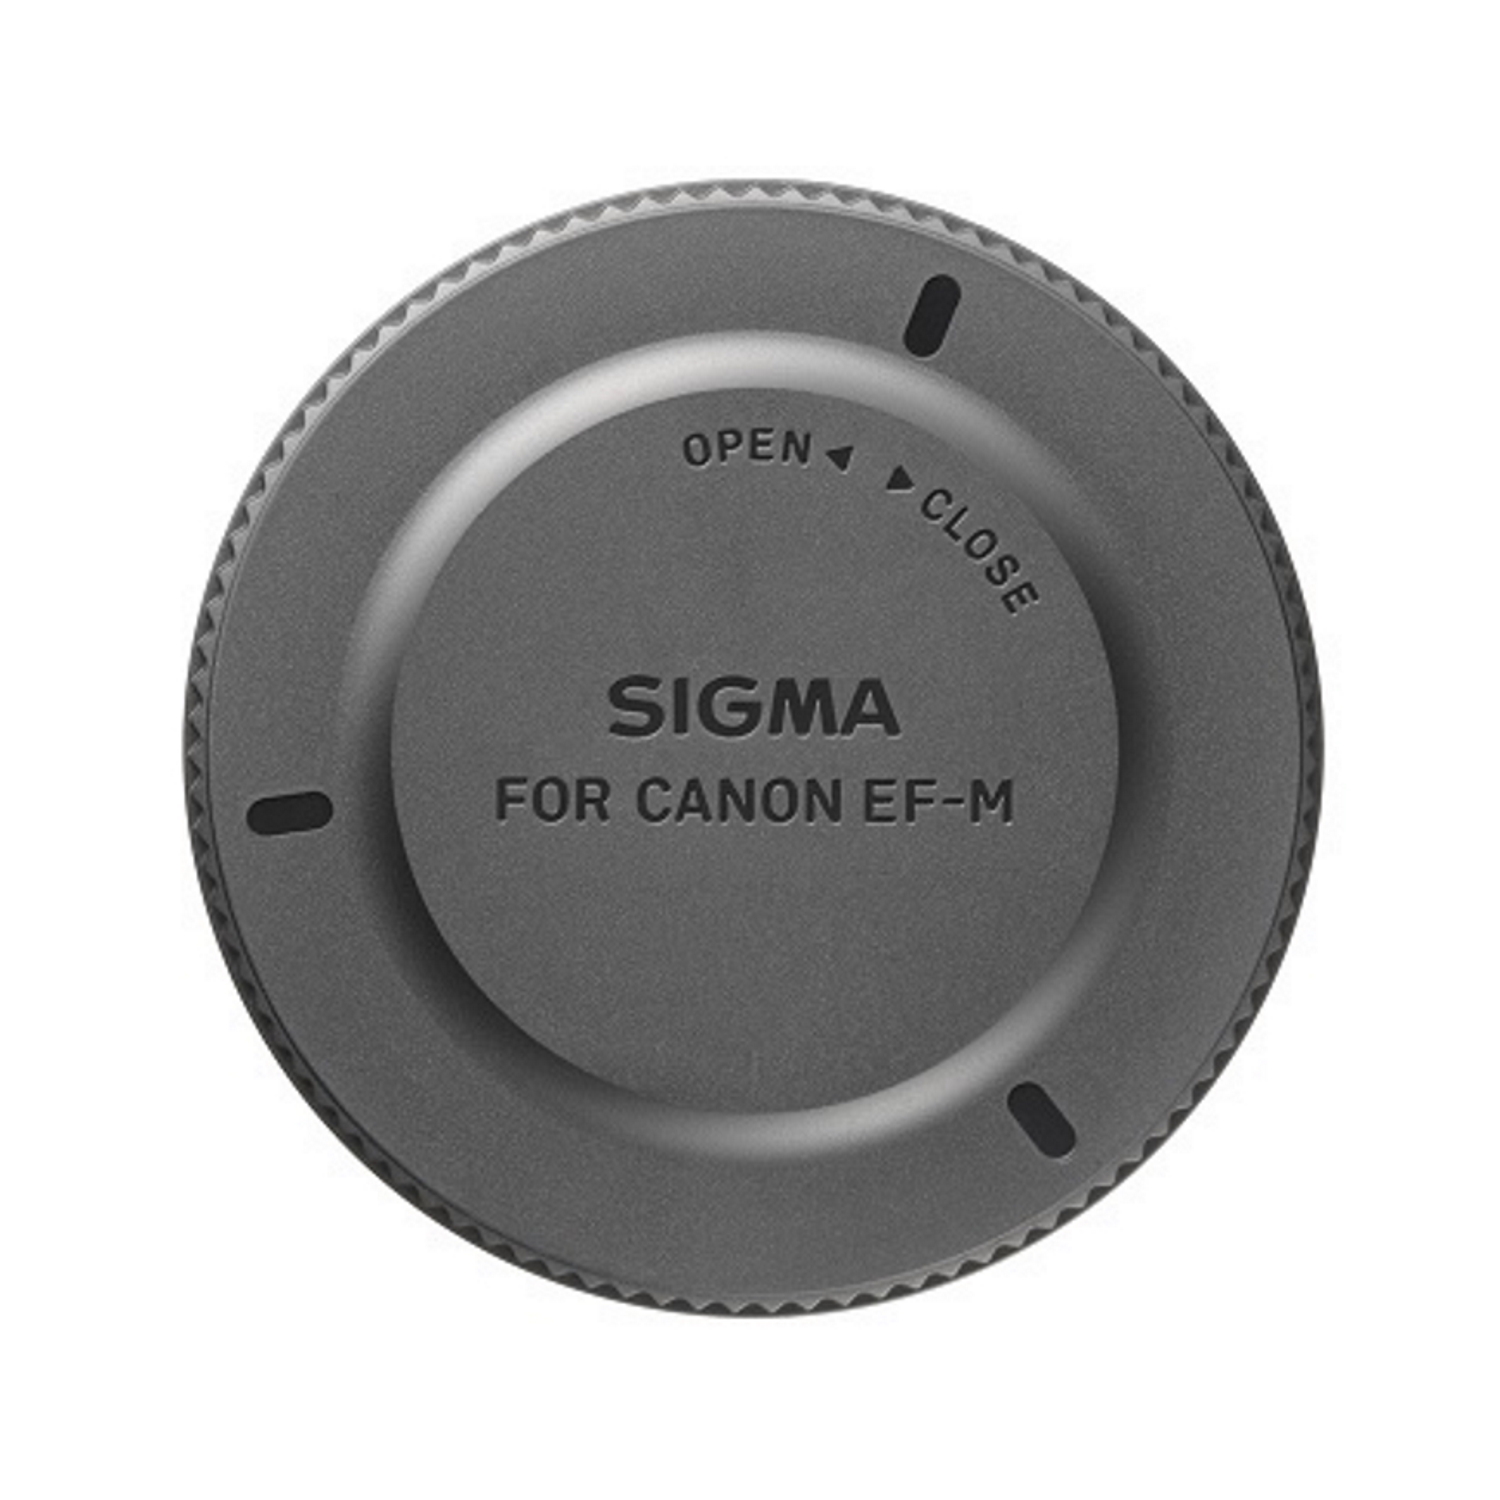 Sigma LCT II-EOM Body Cap for Canon EF-M-Mount Cameras